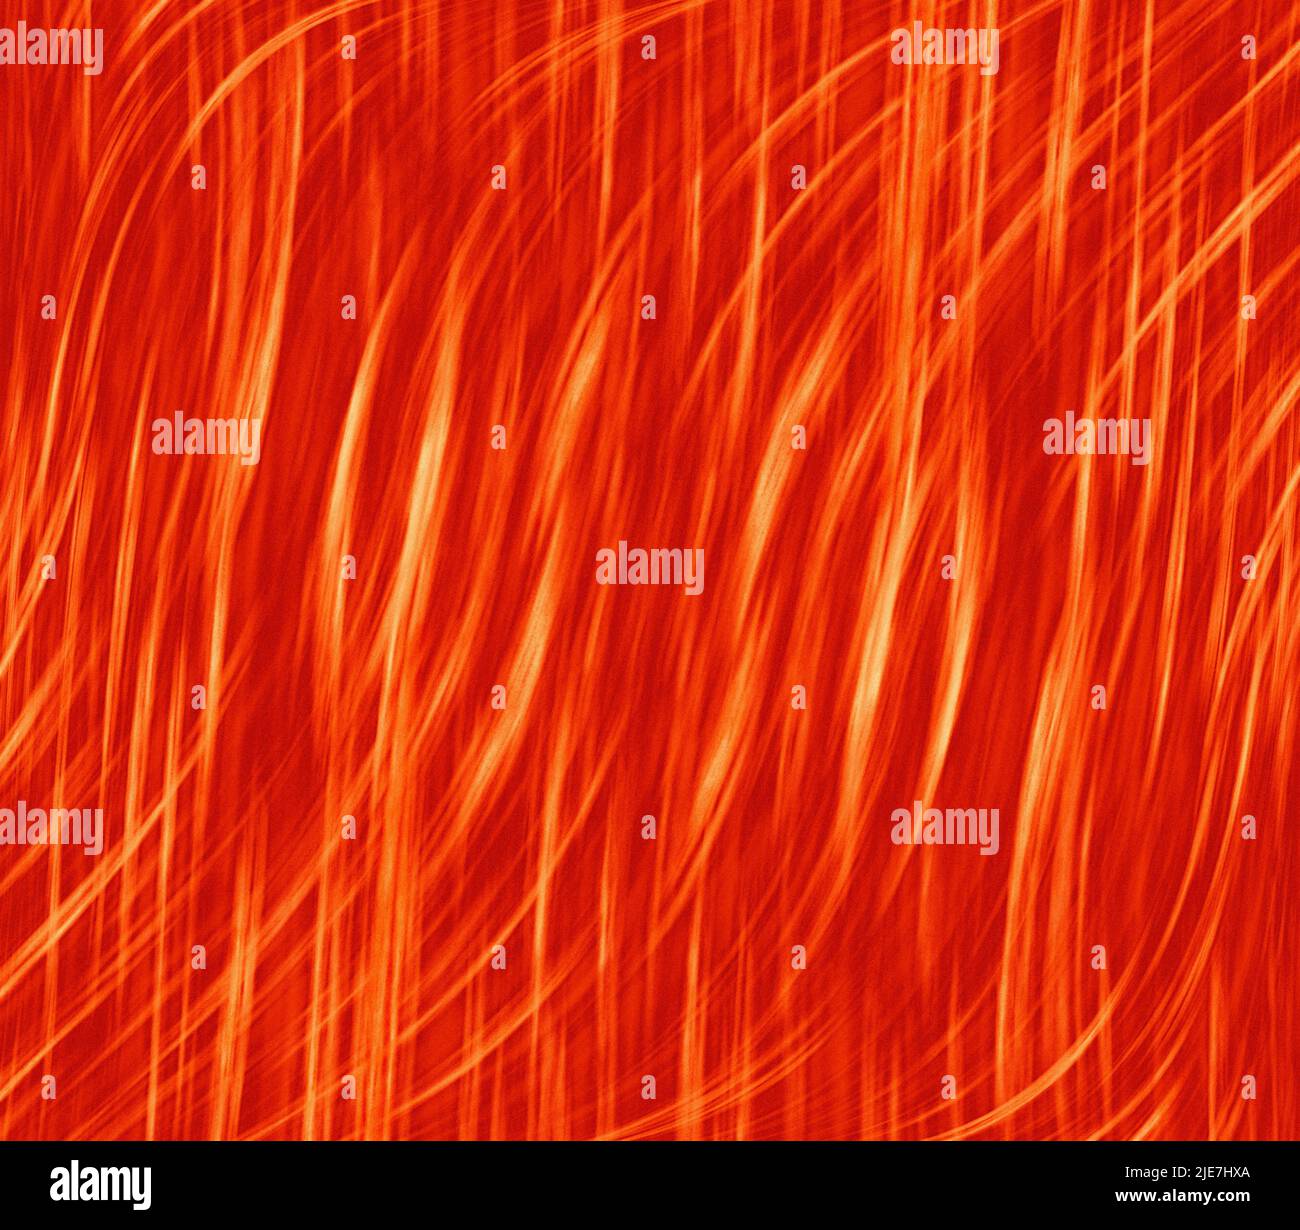 Orange and yellow waves abstract design Stock Photo